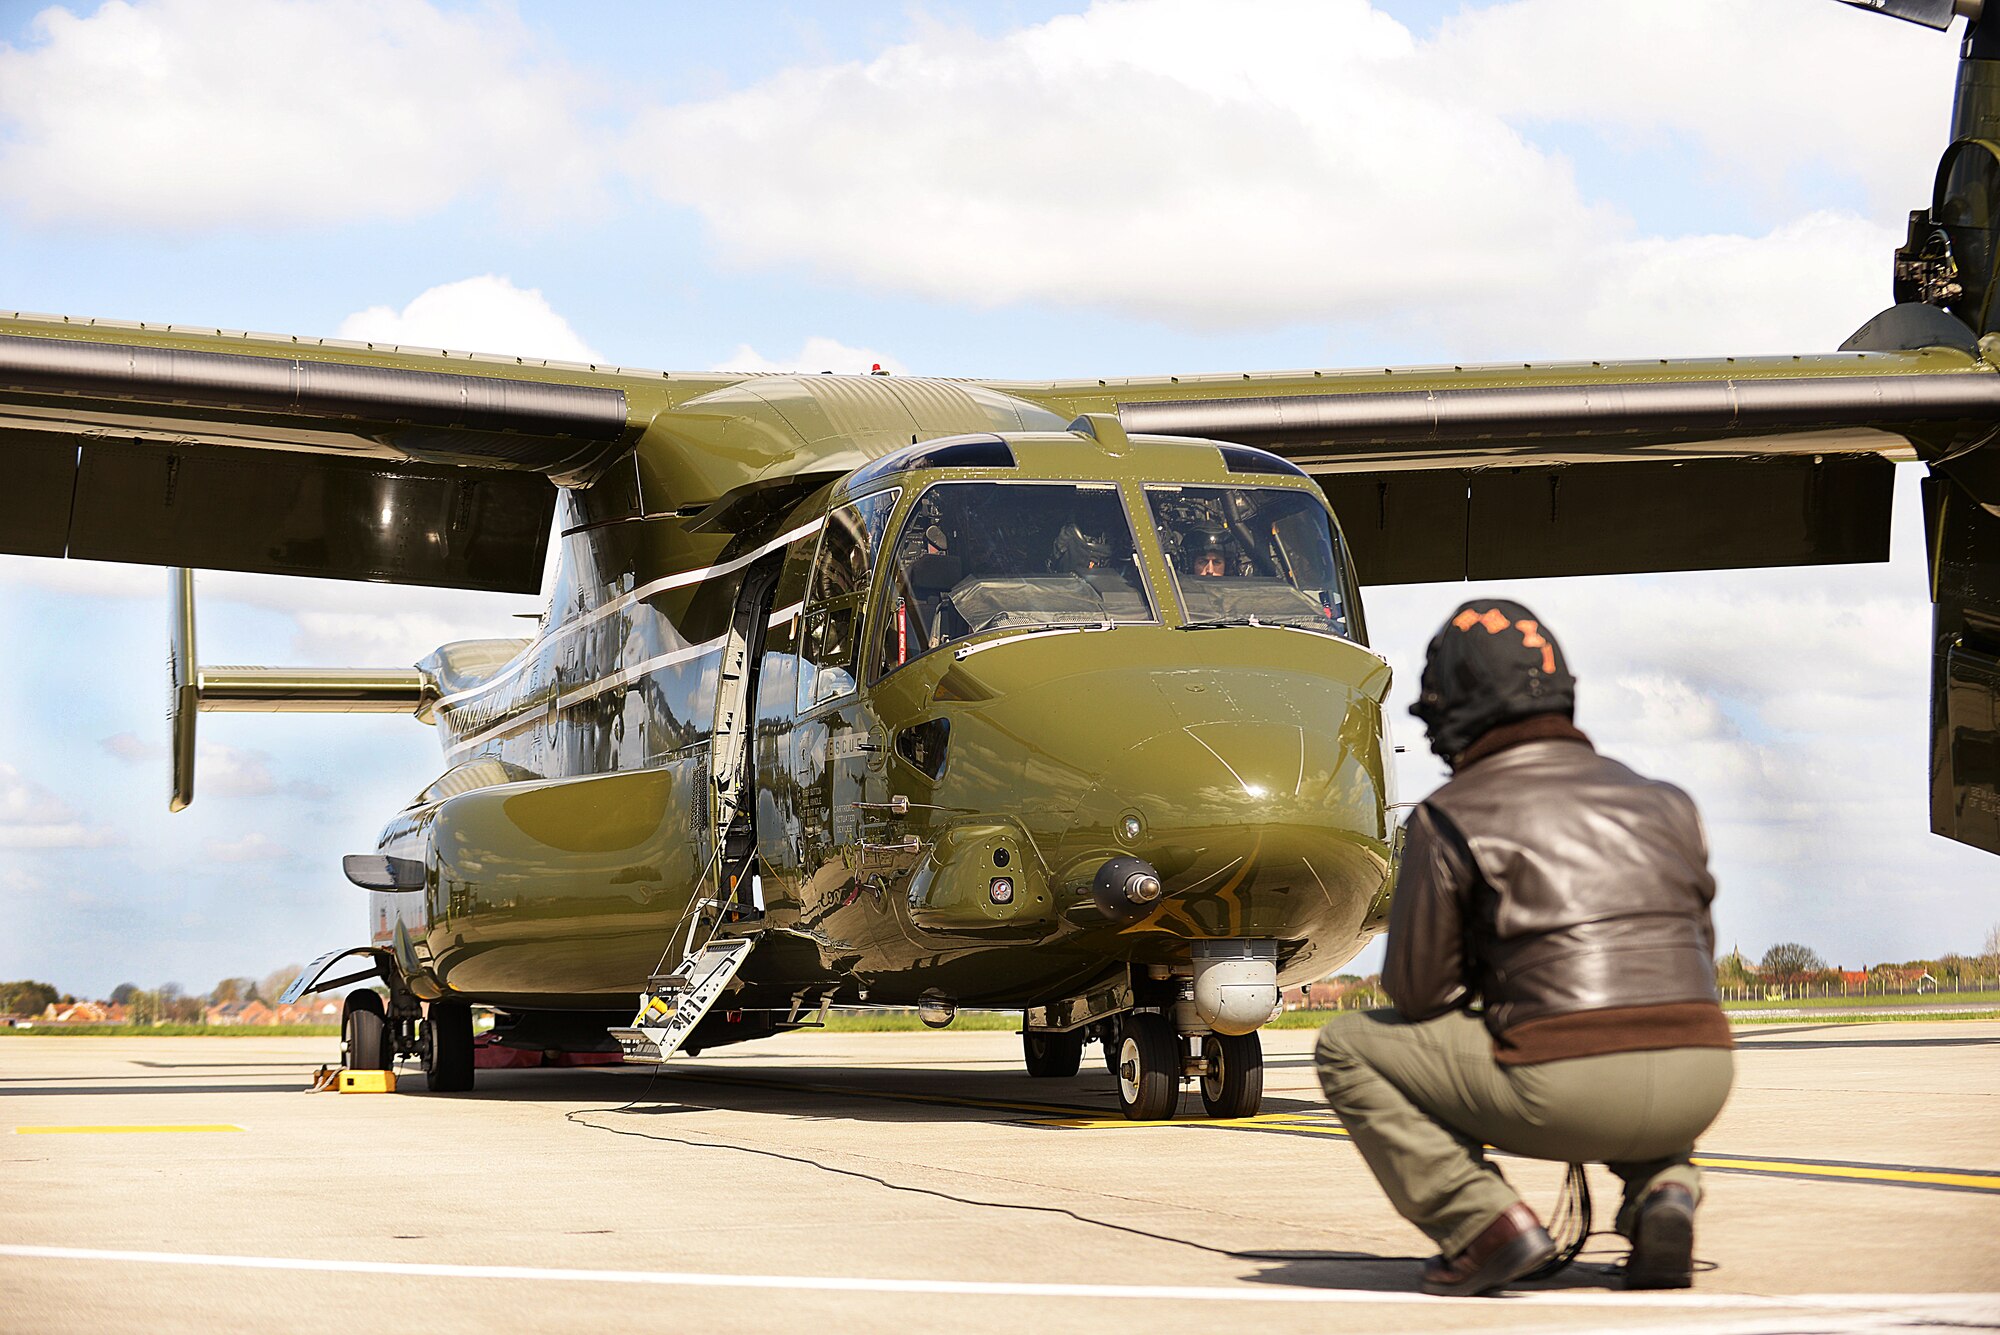 U.S. Marine Corps Staff Sgt. Patrick Riley and Cpl. Jonathan Renshaw, MV-22 Osprey crew chiefs, conduct pre-flight inspections to ensure the aircraft are flight ready April 19, 2016, on RAF Mildenhall, England. The aircraft were on the flightline in support of the President’s visit to the United Kingdom and Germany where he held bilateral meetings and participated in the Hannover Messe. U.S. European Command and U.S. Air Forces in Europe-Air Forces Africa were working with other government agencies and authorities in the U.K. and Germany to provide assistance as requested to ensure a successful visit. (U.S. Air Force photo by Airman 1st Class Tenley Long/Released)